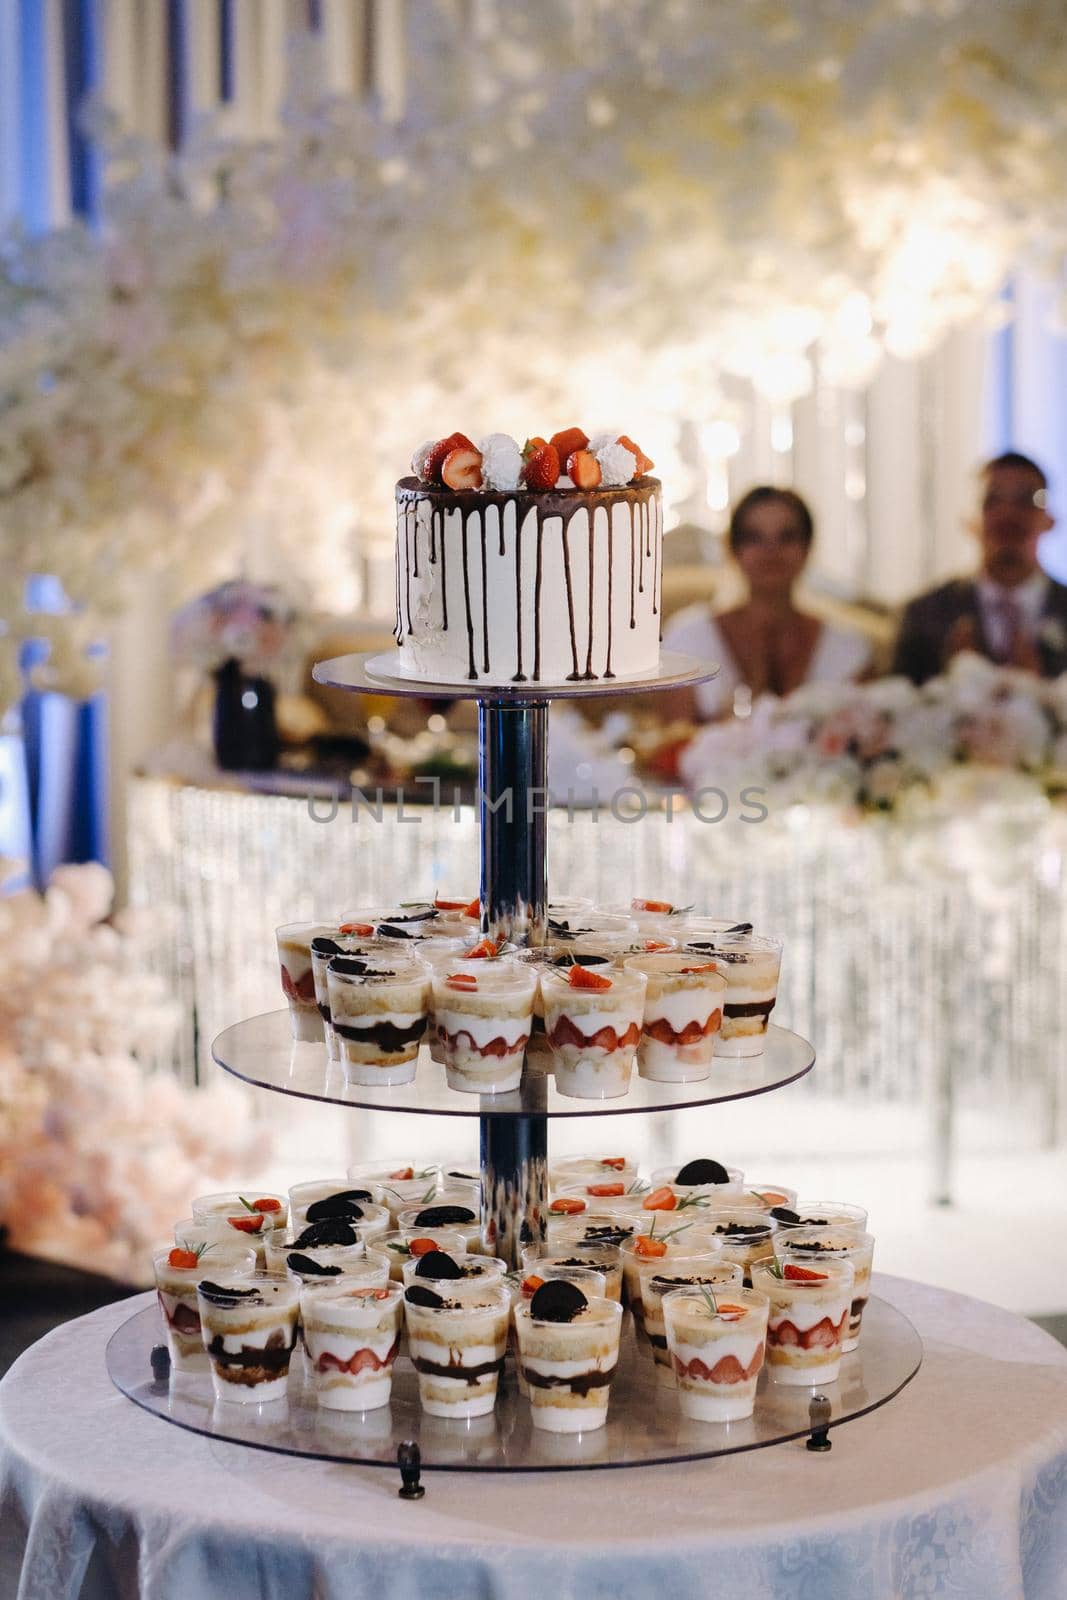 Cake and cakes on a stand at a wedding.